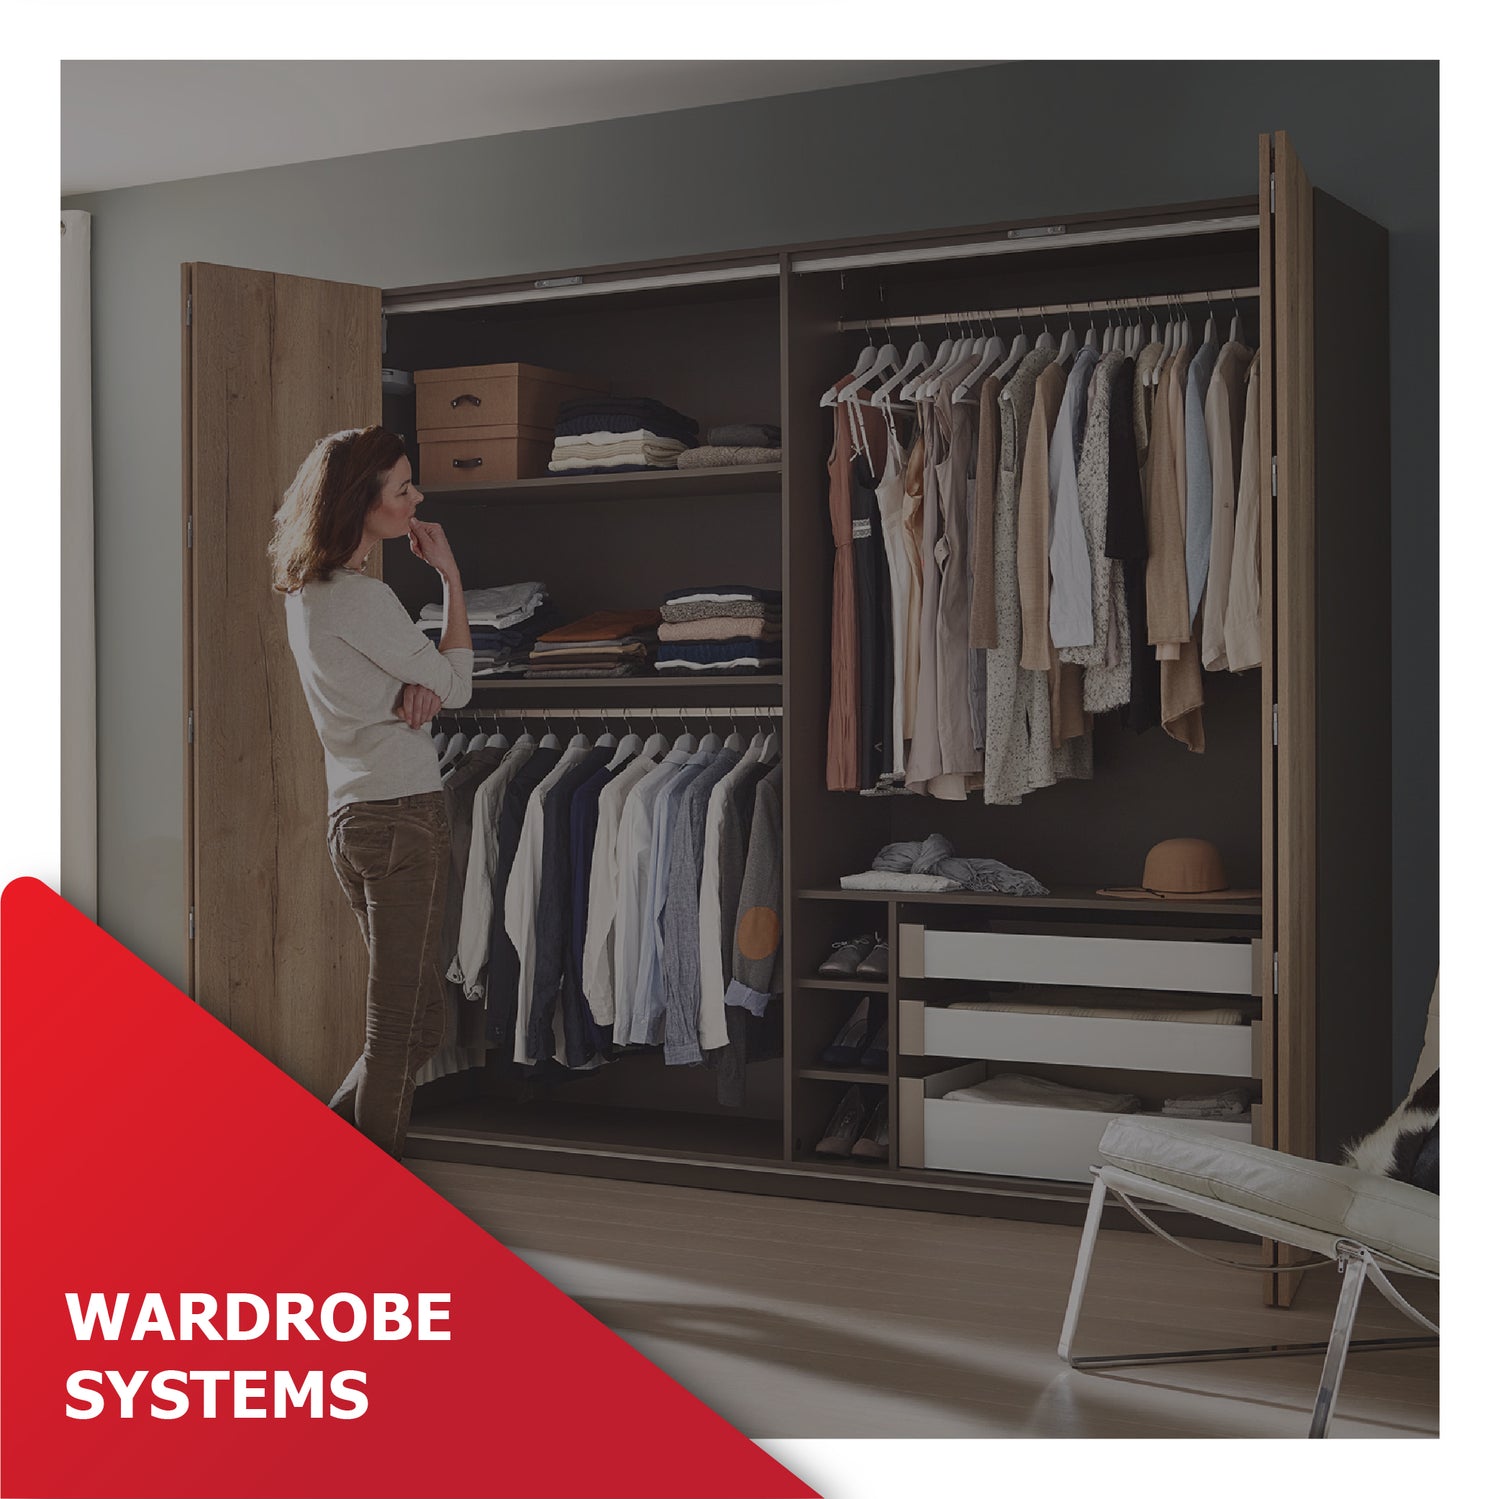 Wardrobe Systems - Efficient and Stylish Storage Solutions for Your Wardrobe